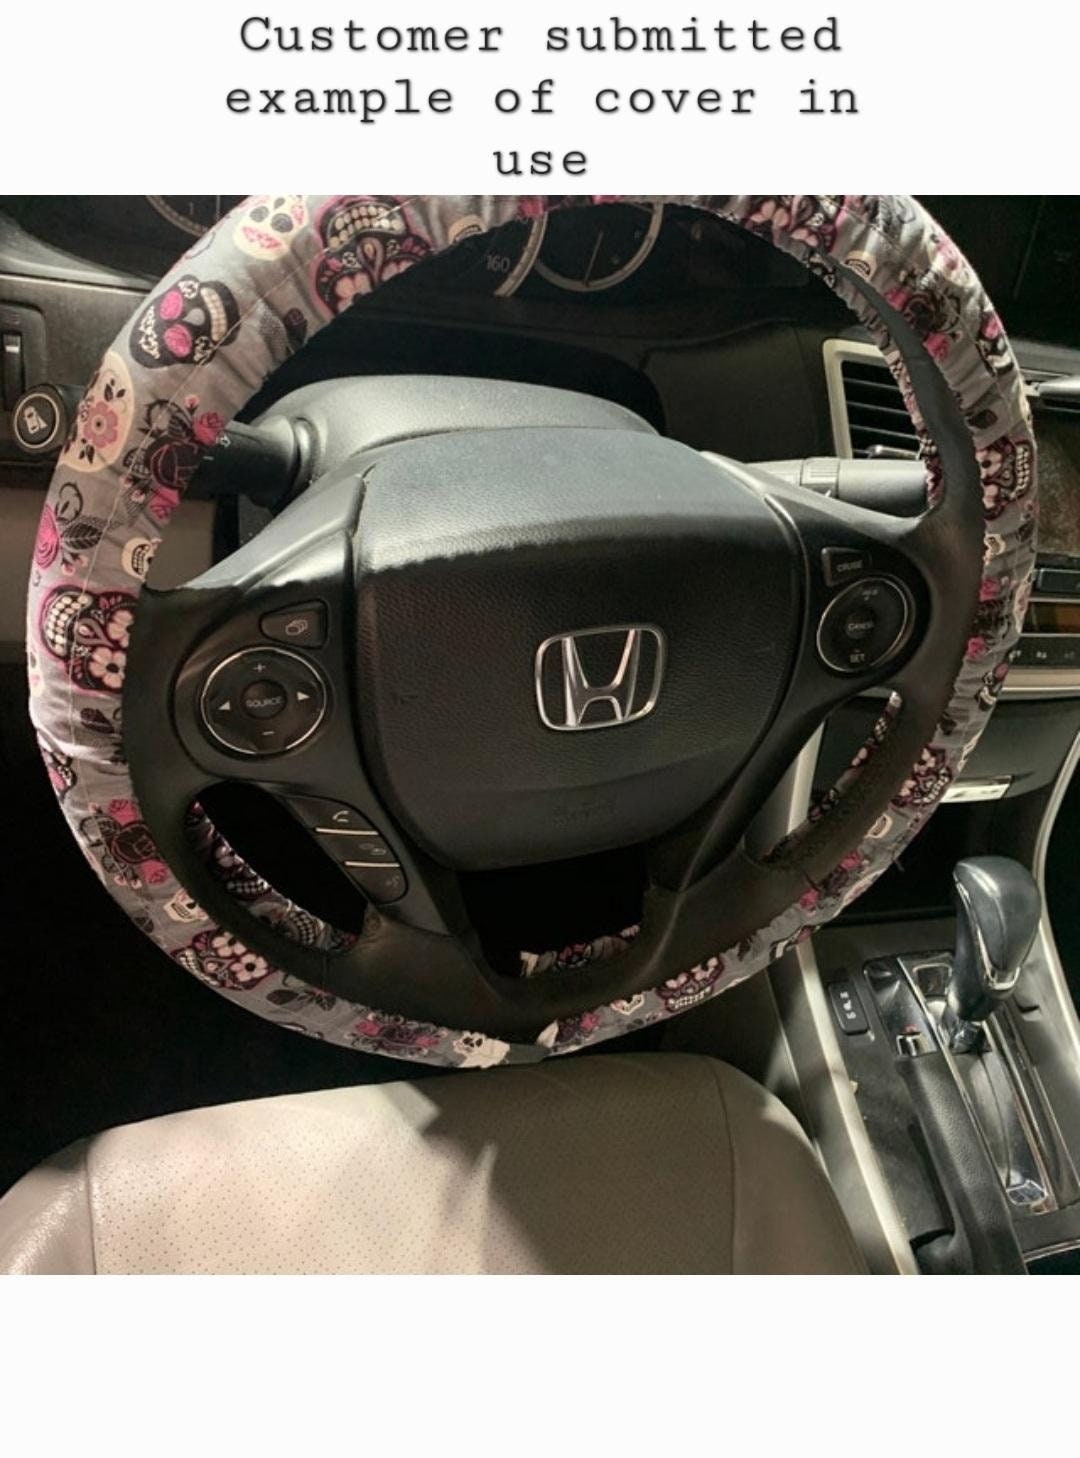 Humming Bird Steering Wheel Cover, 100% Cotton, Washable, Custom Car Accessories - Harlow's Store and Garden Gifts